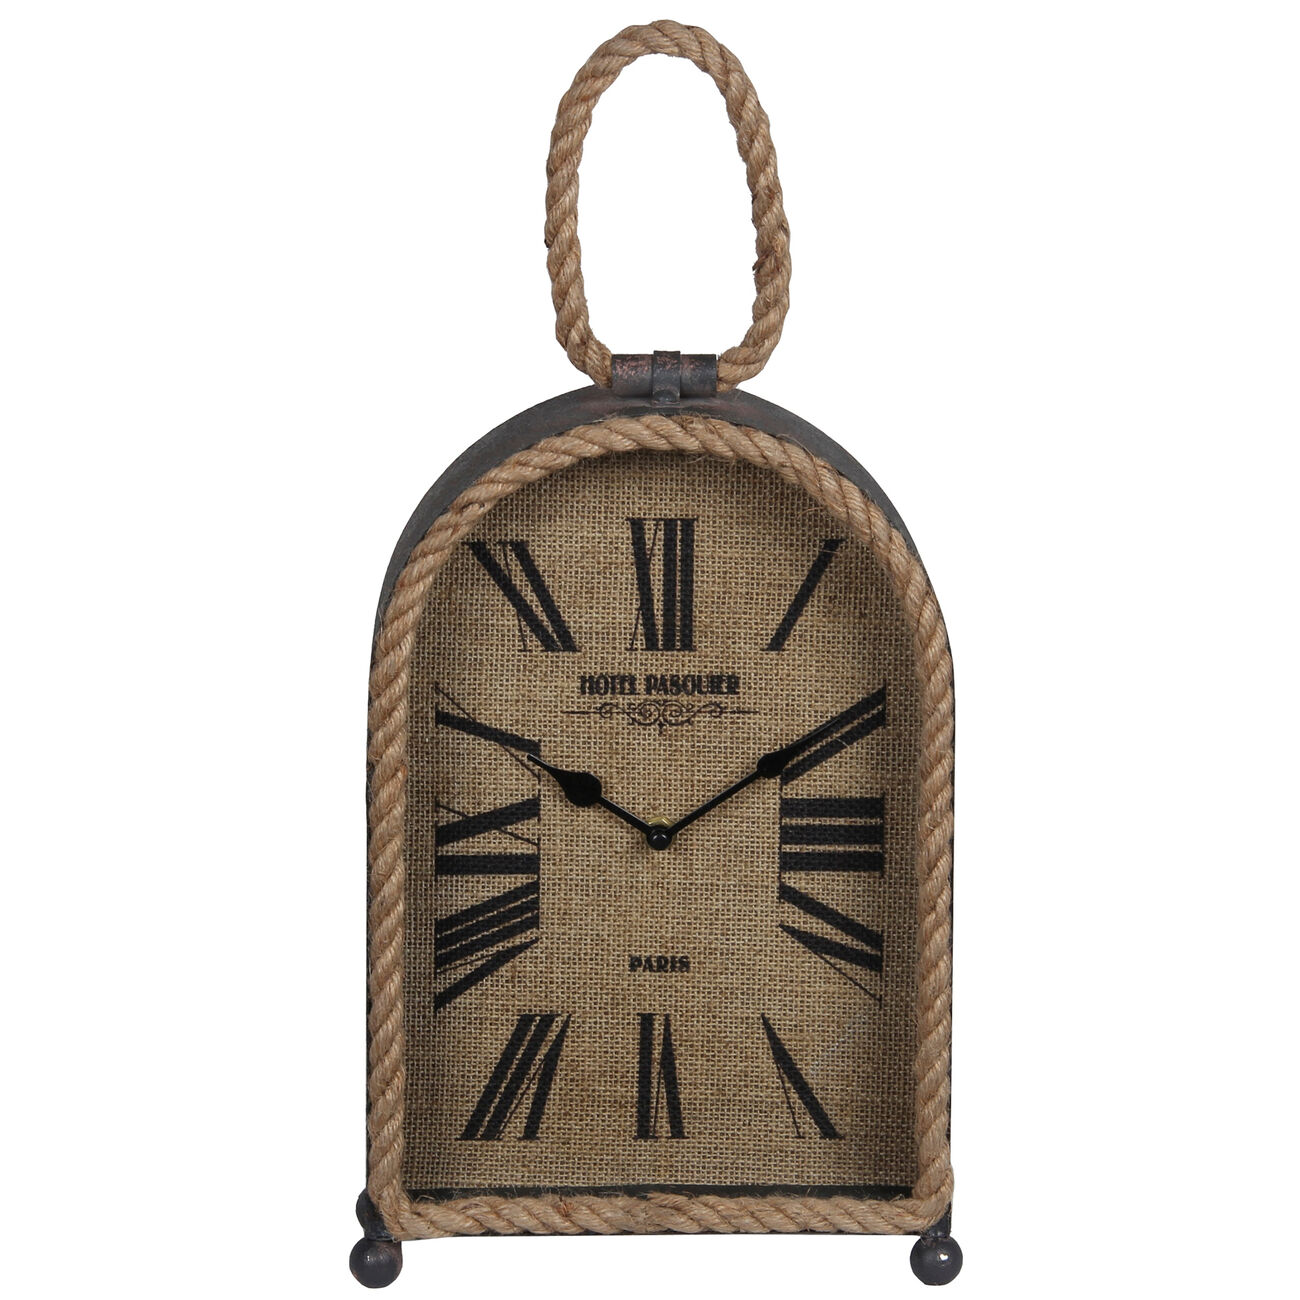 Arch Shape Metal Table Clock with Rope Edges and Handle, Gray and Brown